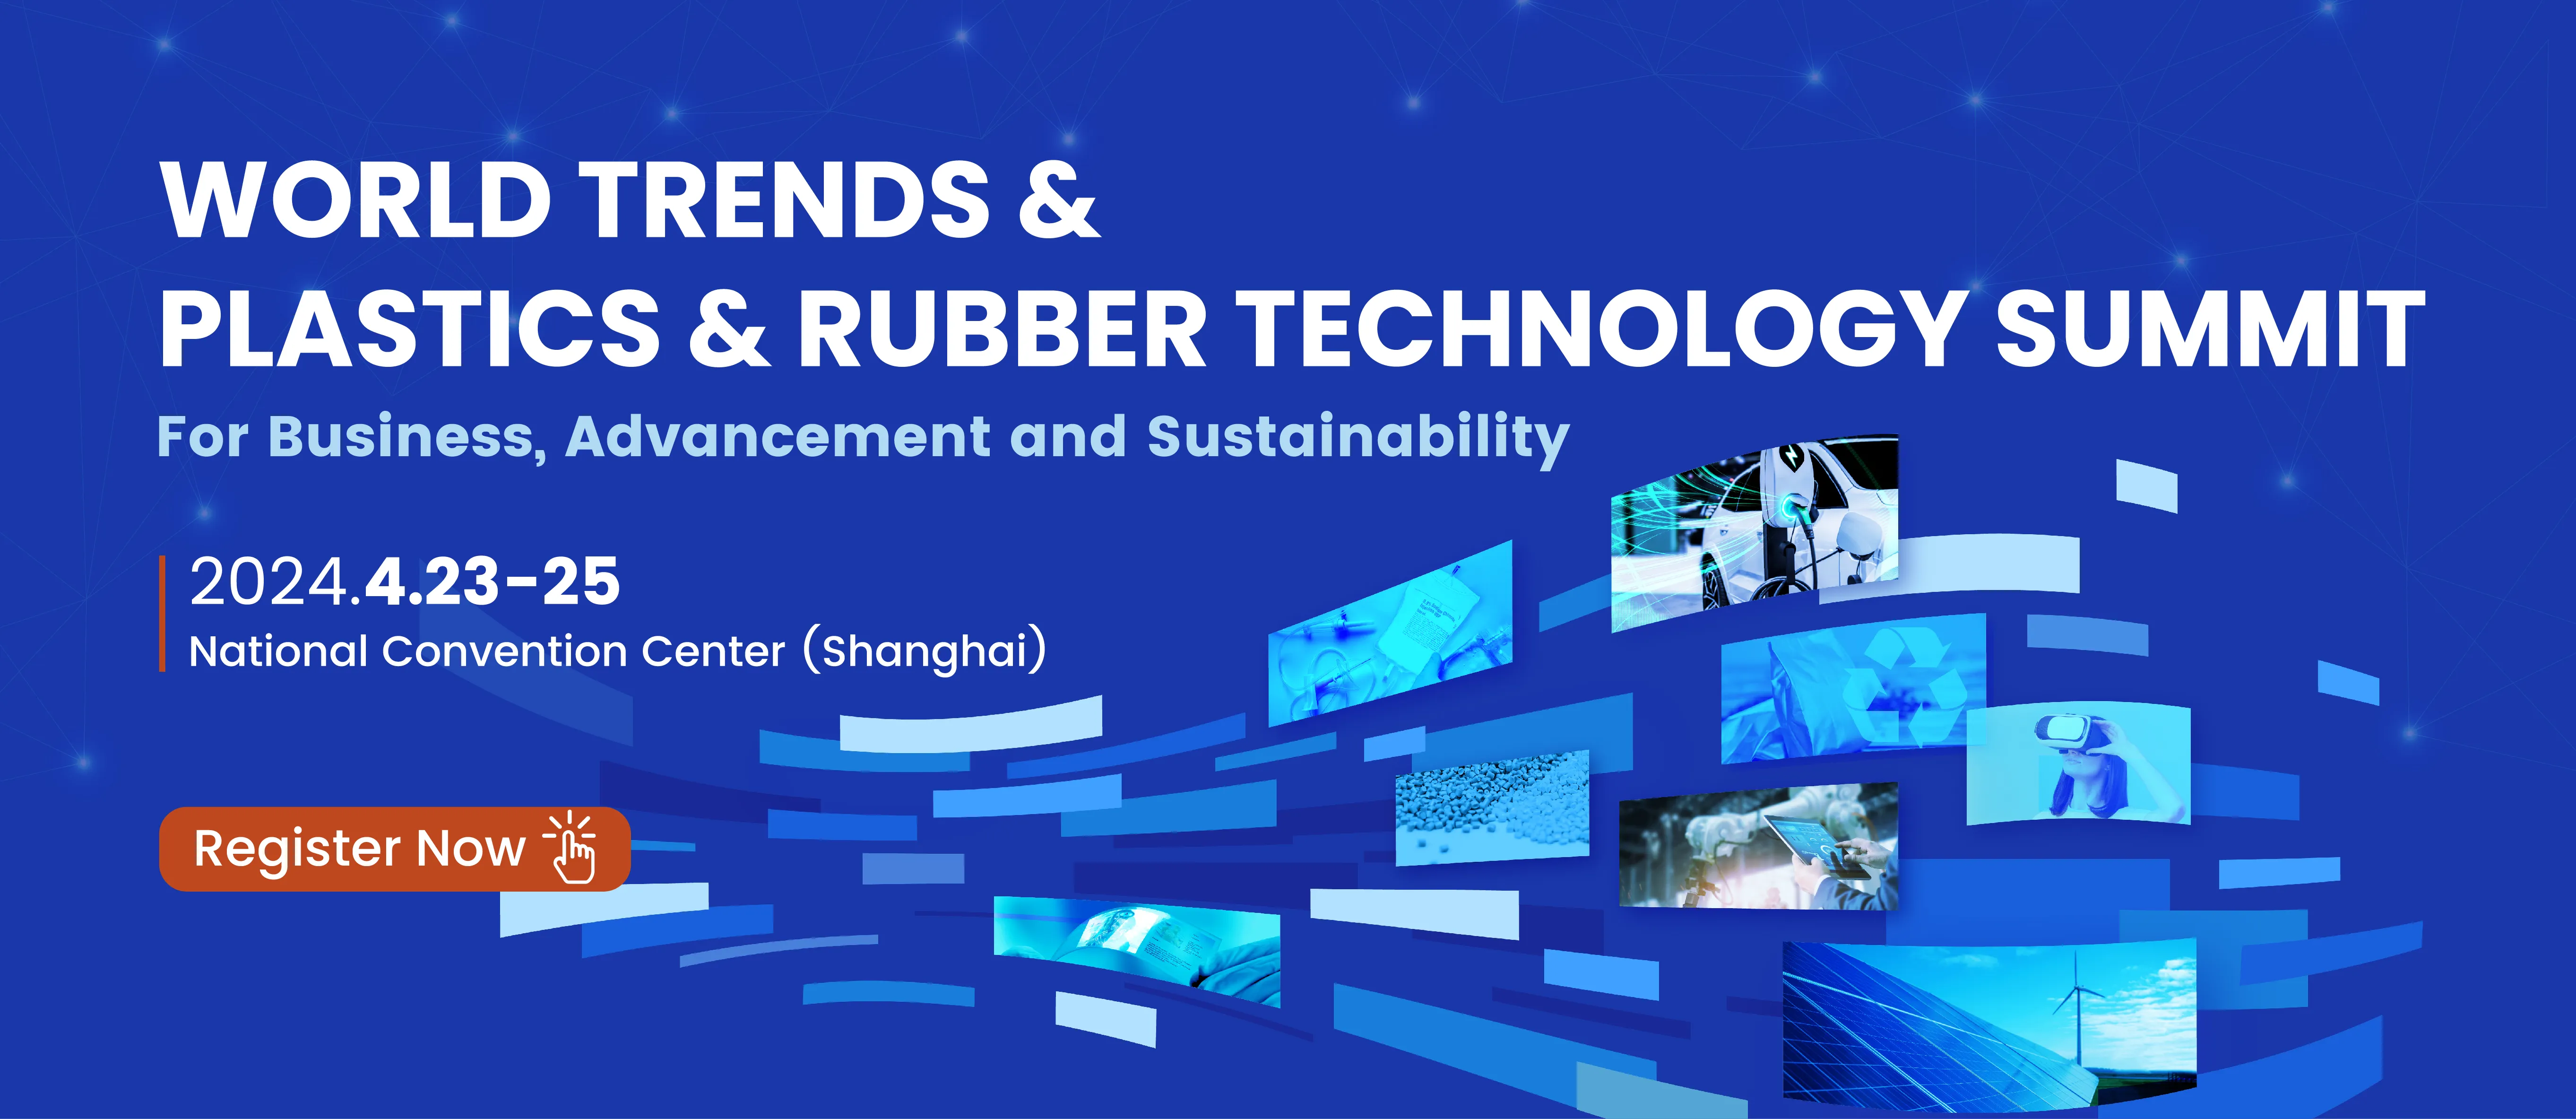 The Global Plastics and Rubber Industry Development Trends Survey